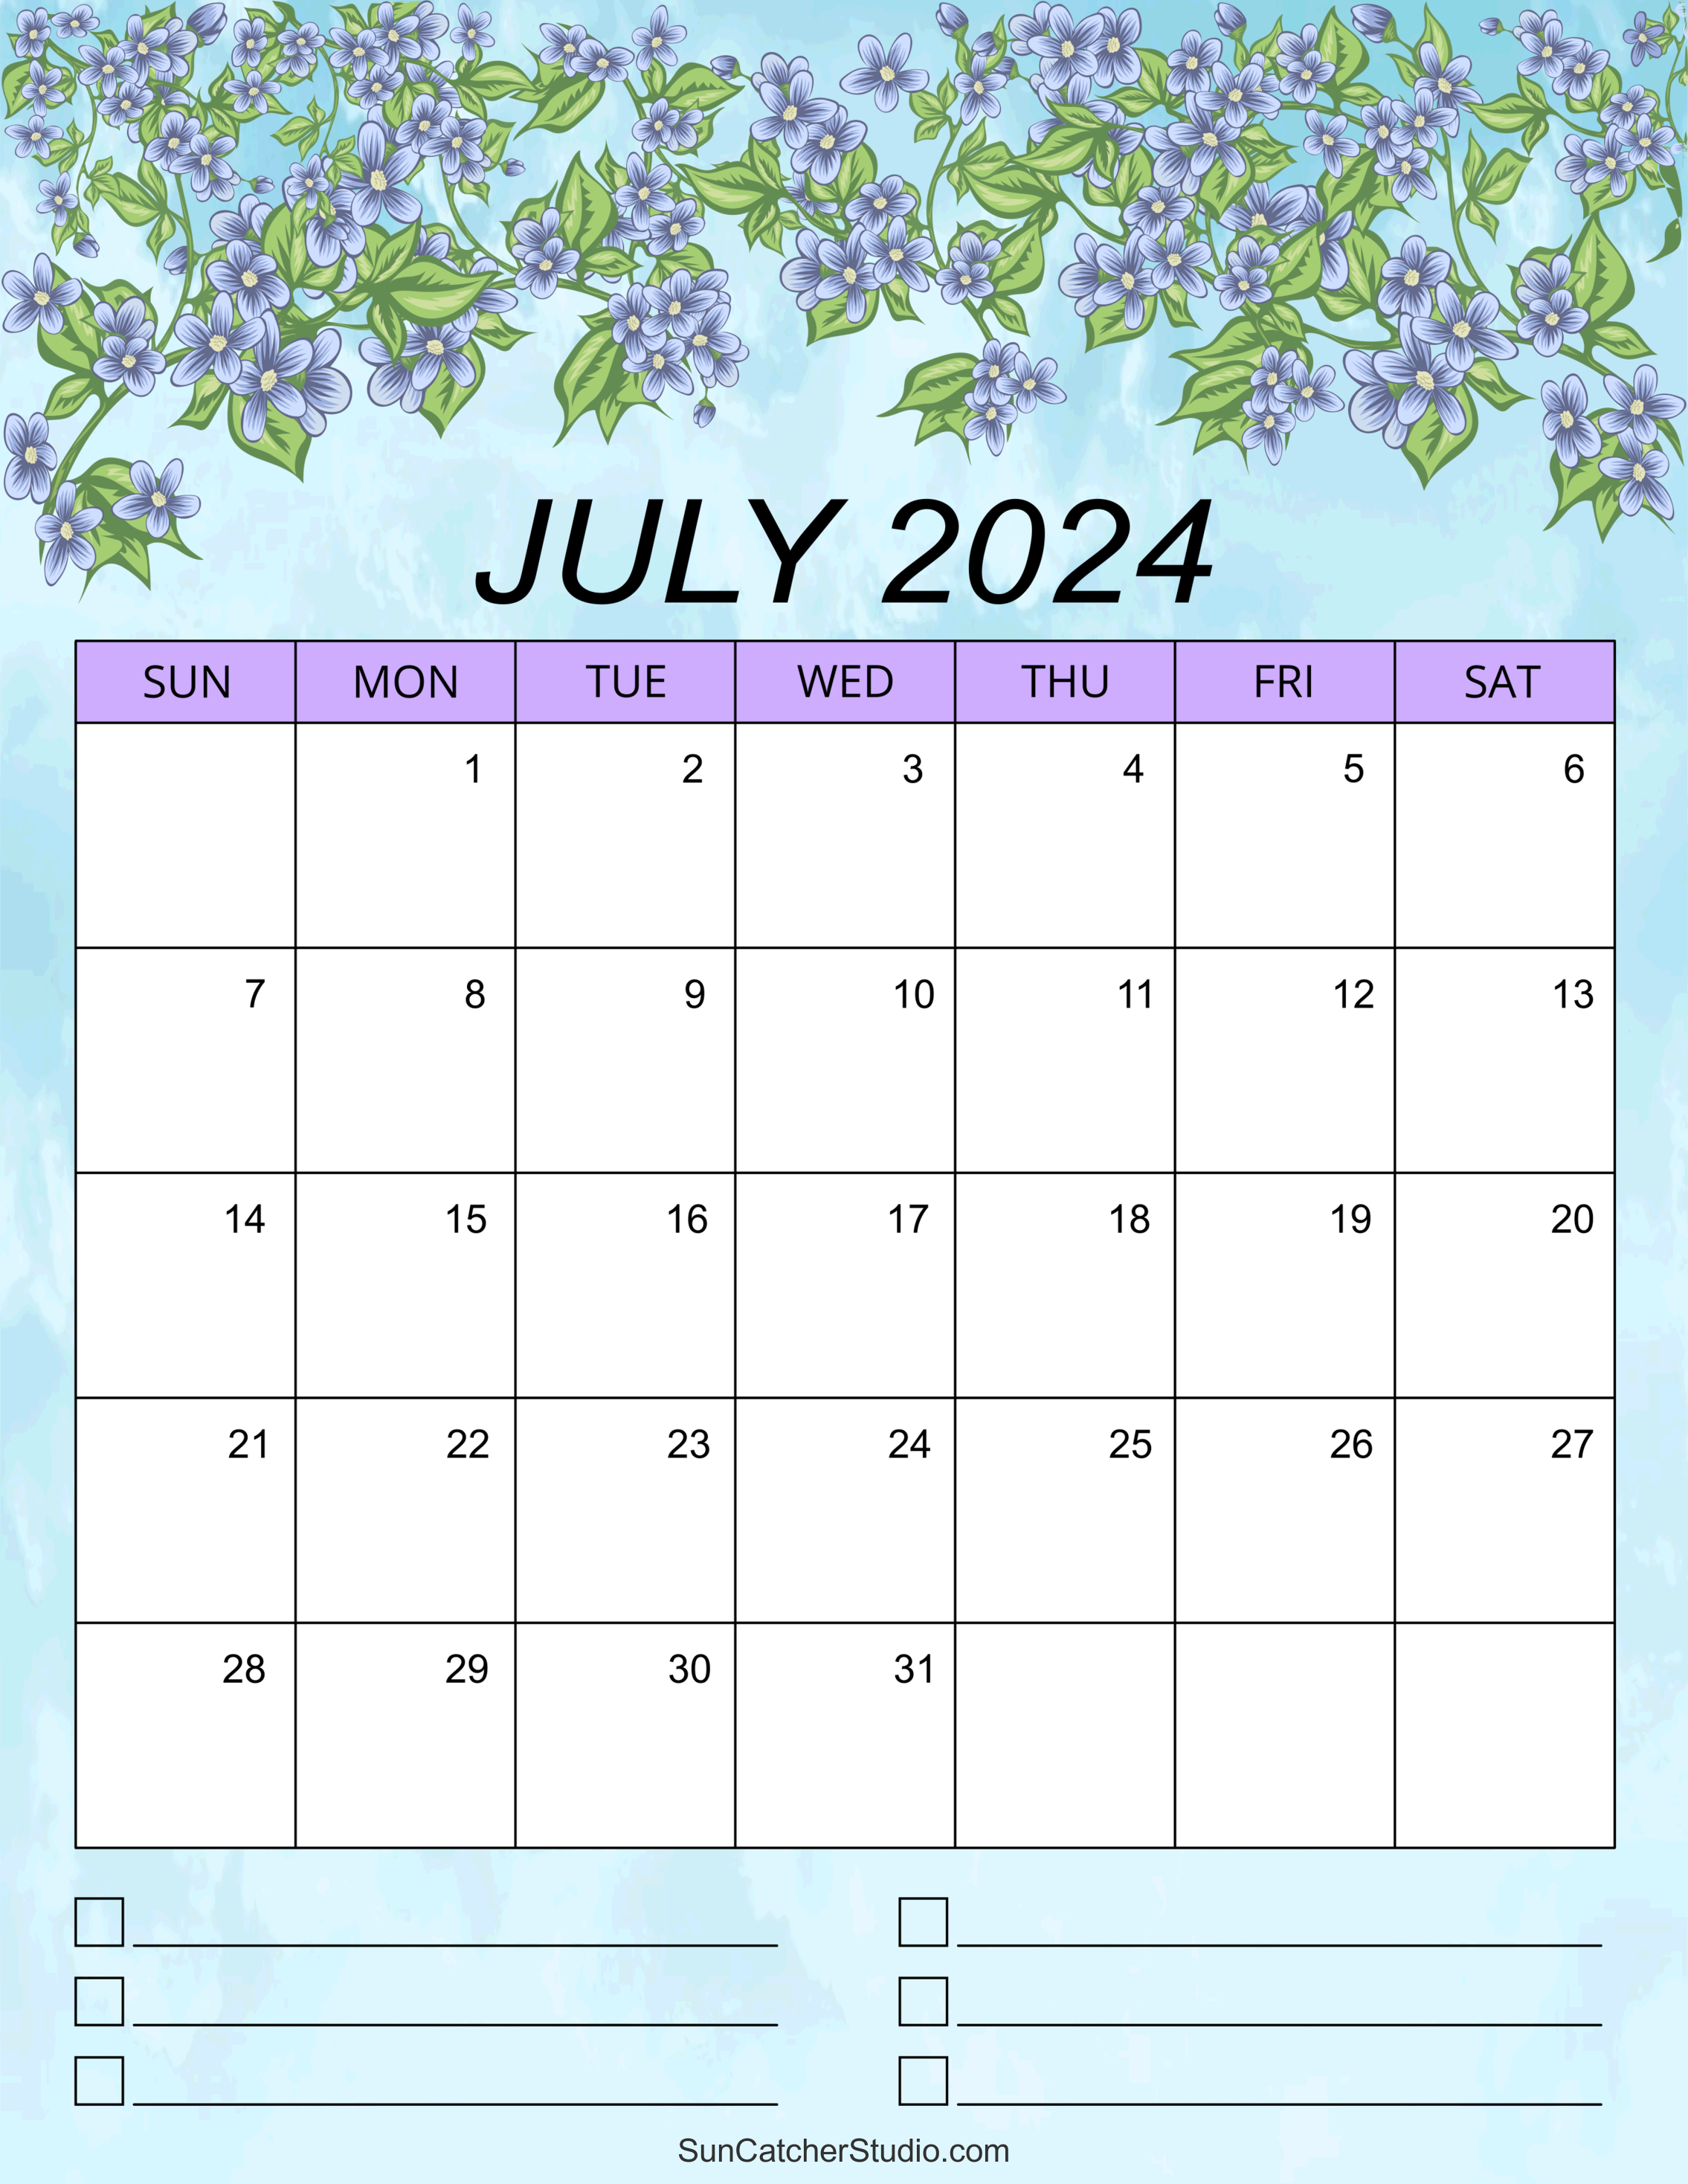 July 2024 Calendar (Free Printable) – Diy Projects, Patterns in 2 Month Calendar Starting July 2024